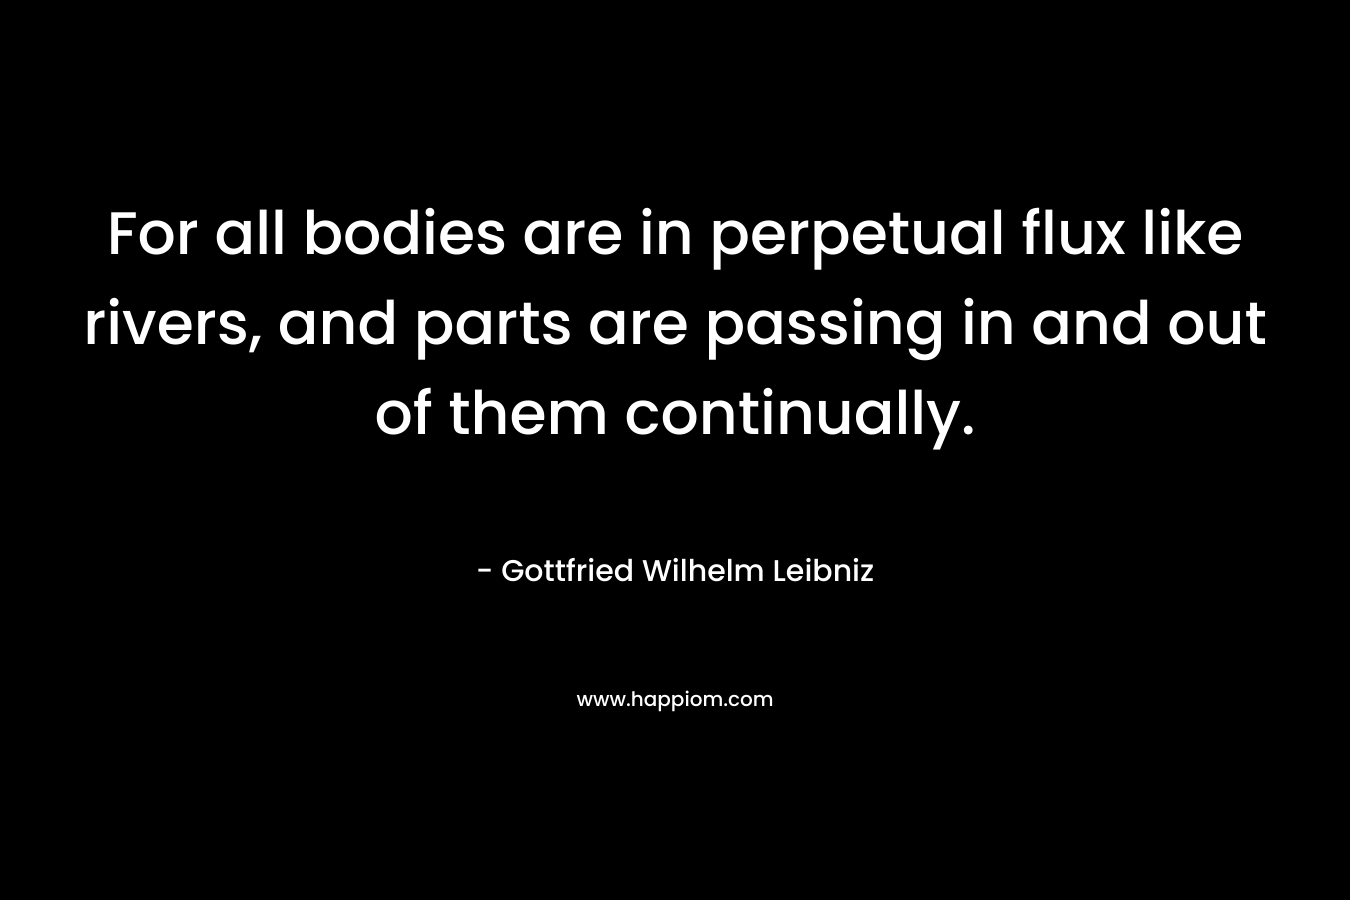 For all bodies are in perpetual flux like rivers, and parts are passing in and out of them continually.